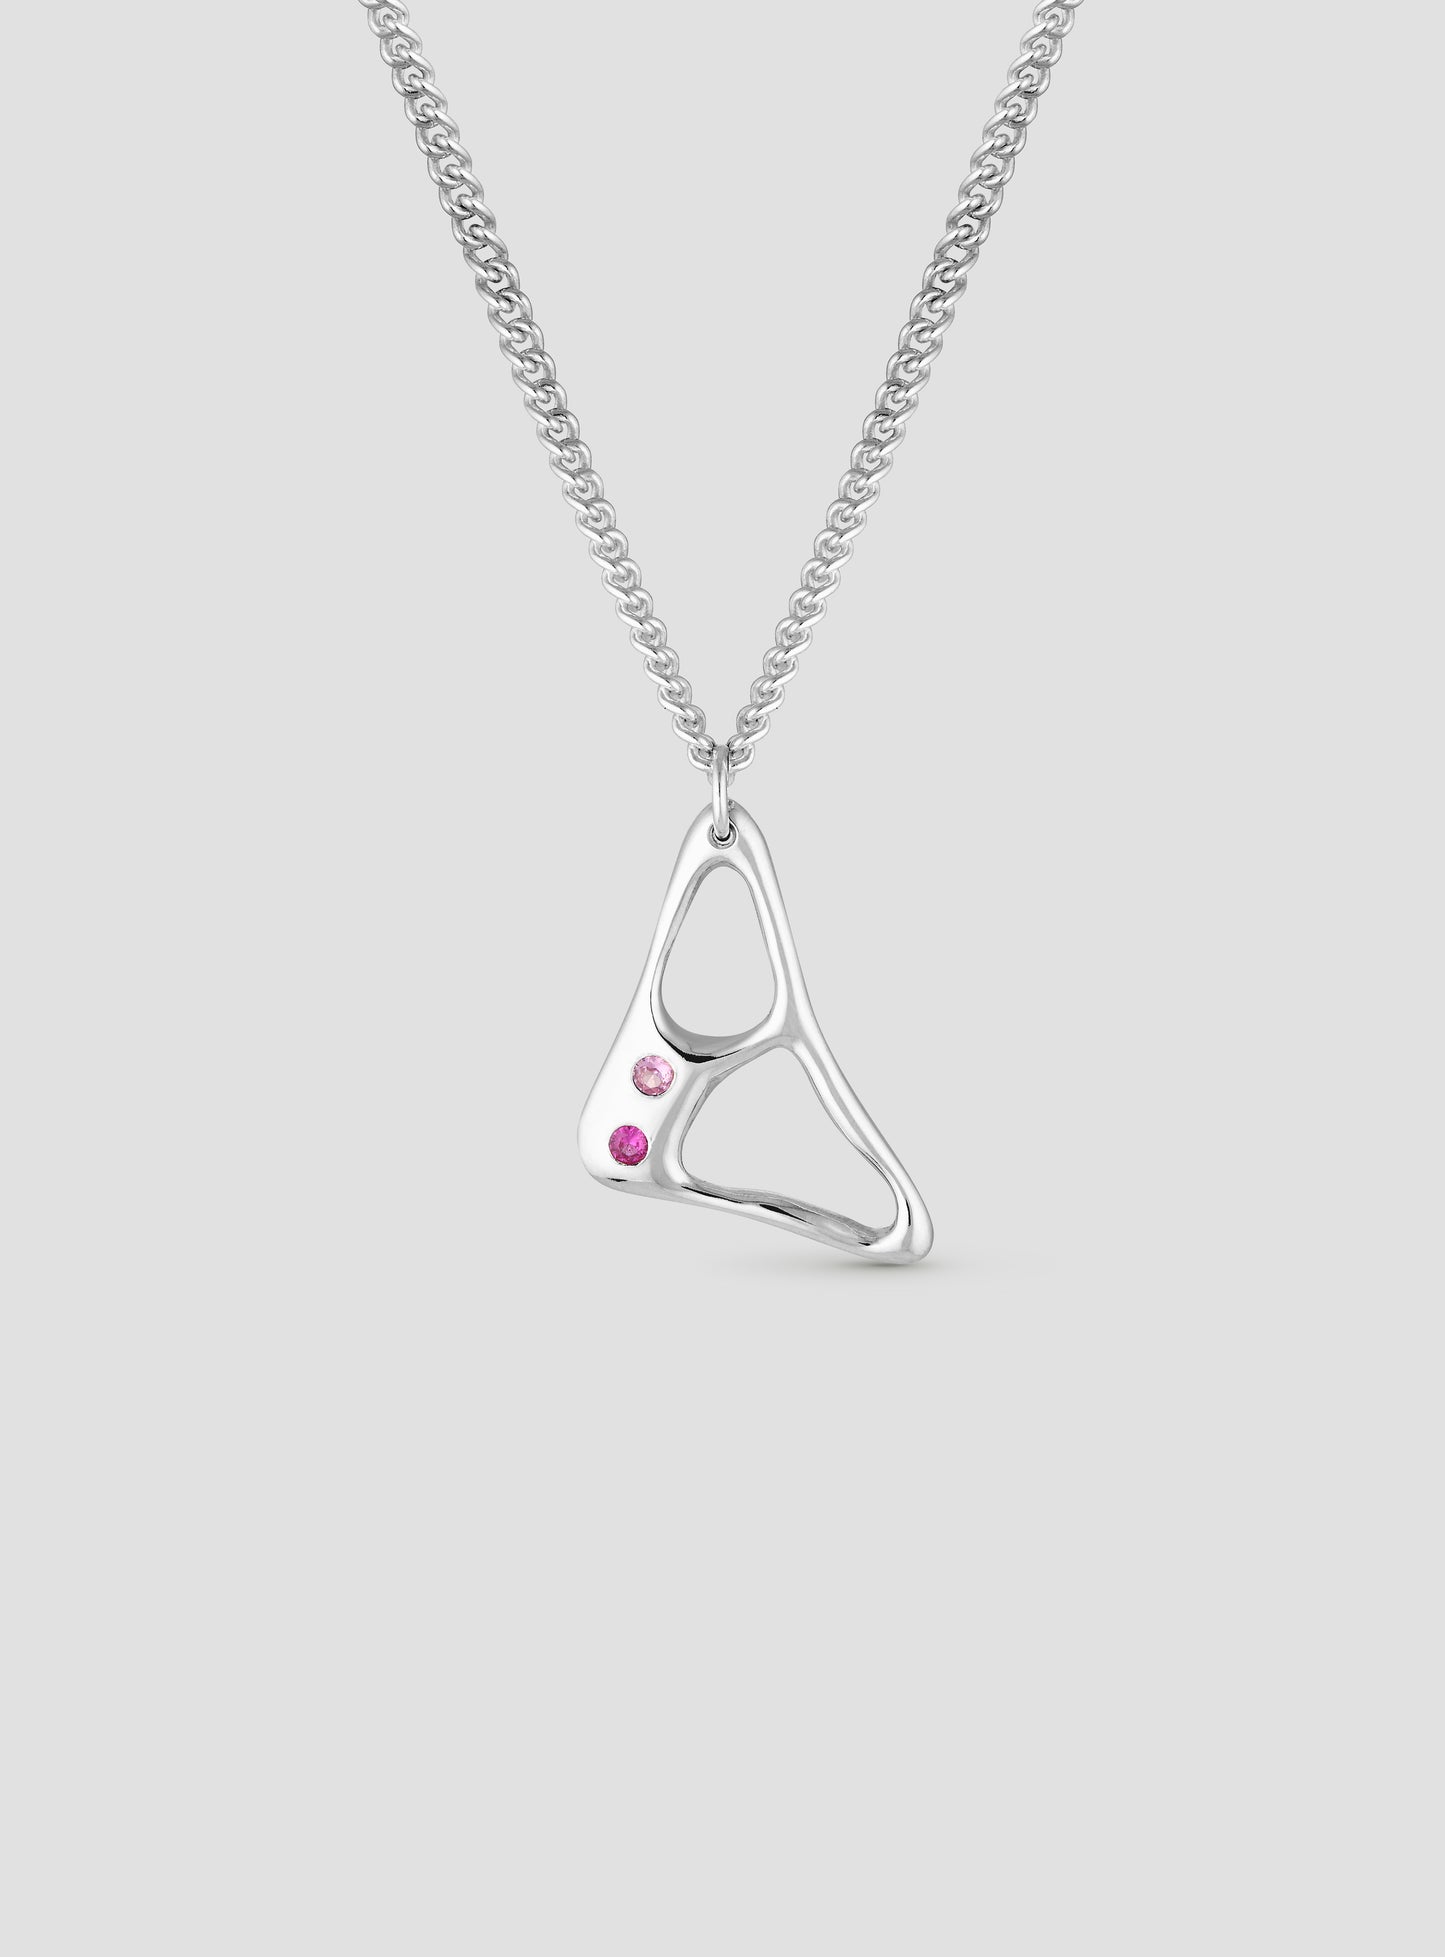 Y-Plane Necklace - Pink Sapphire